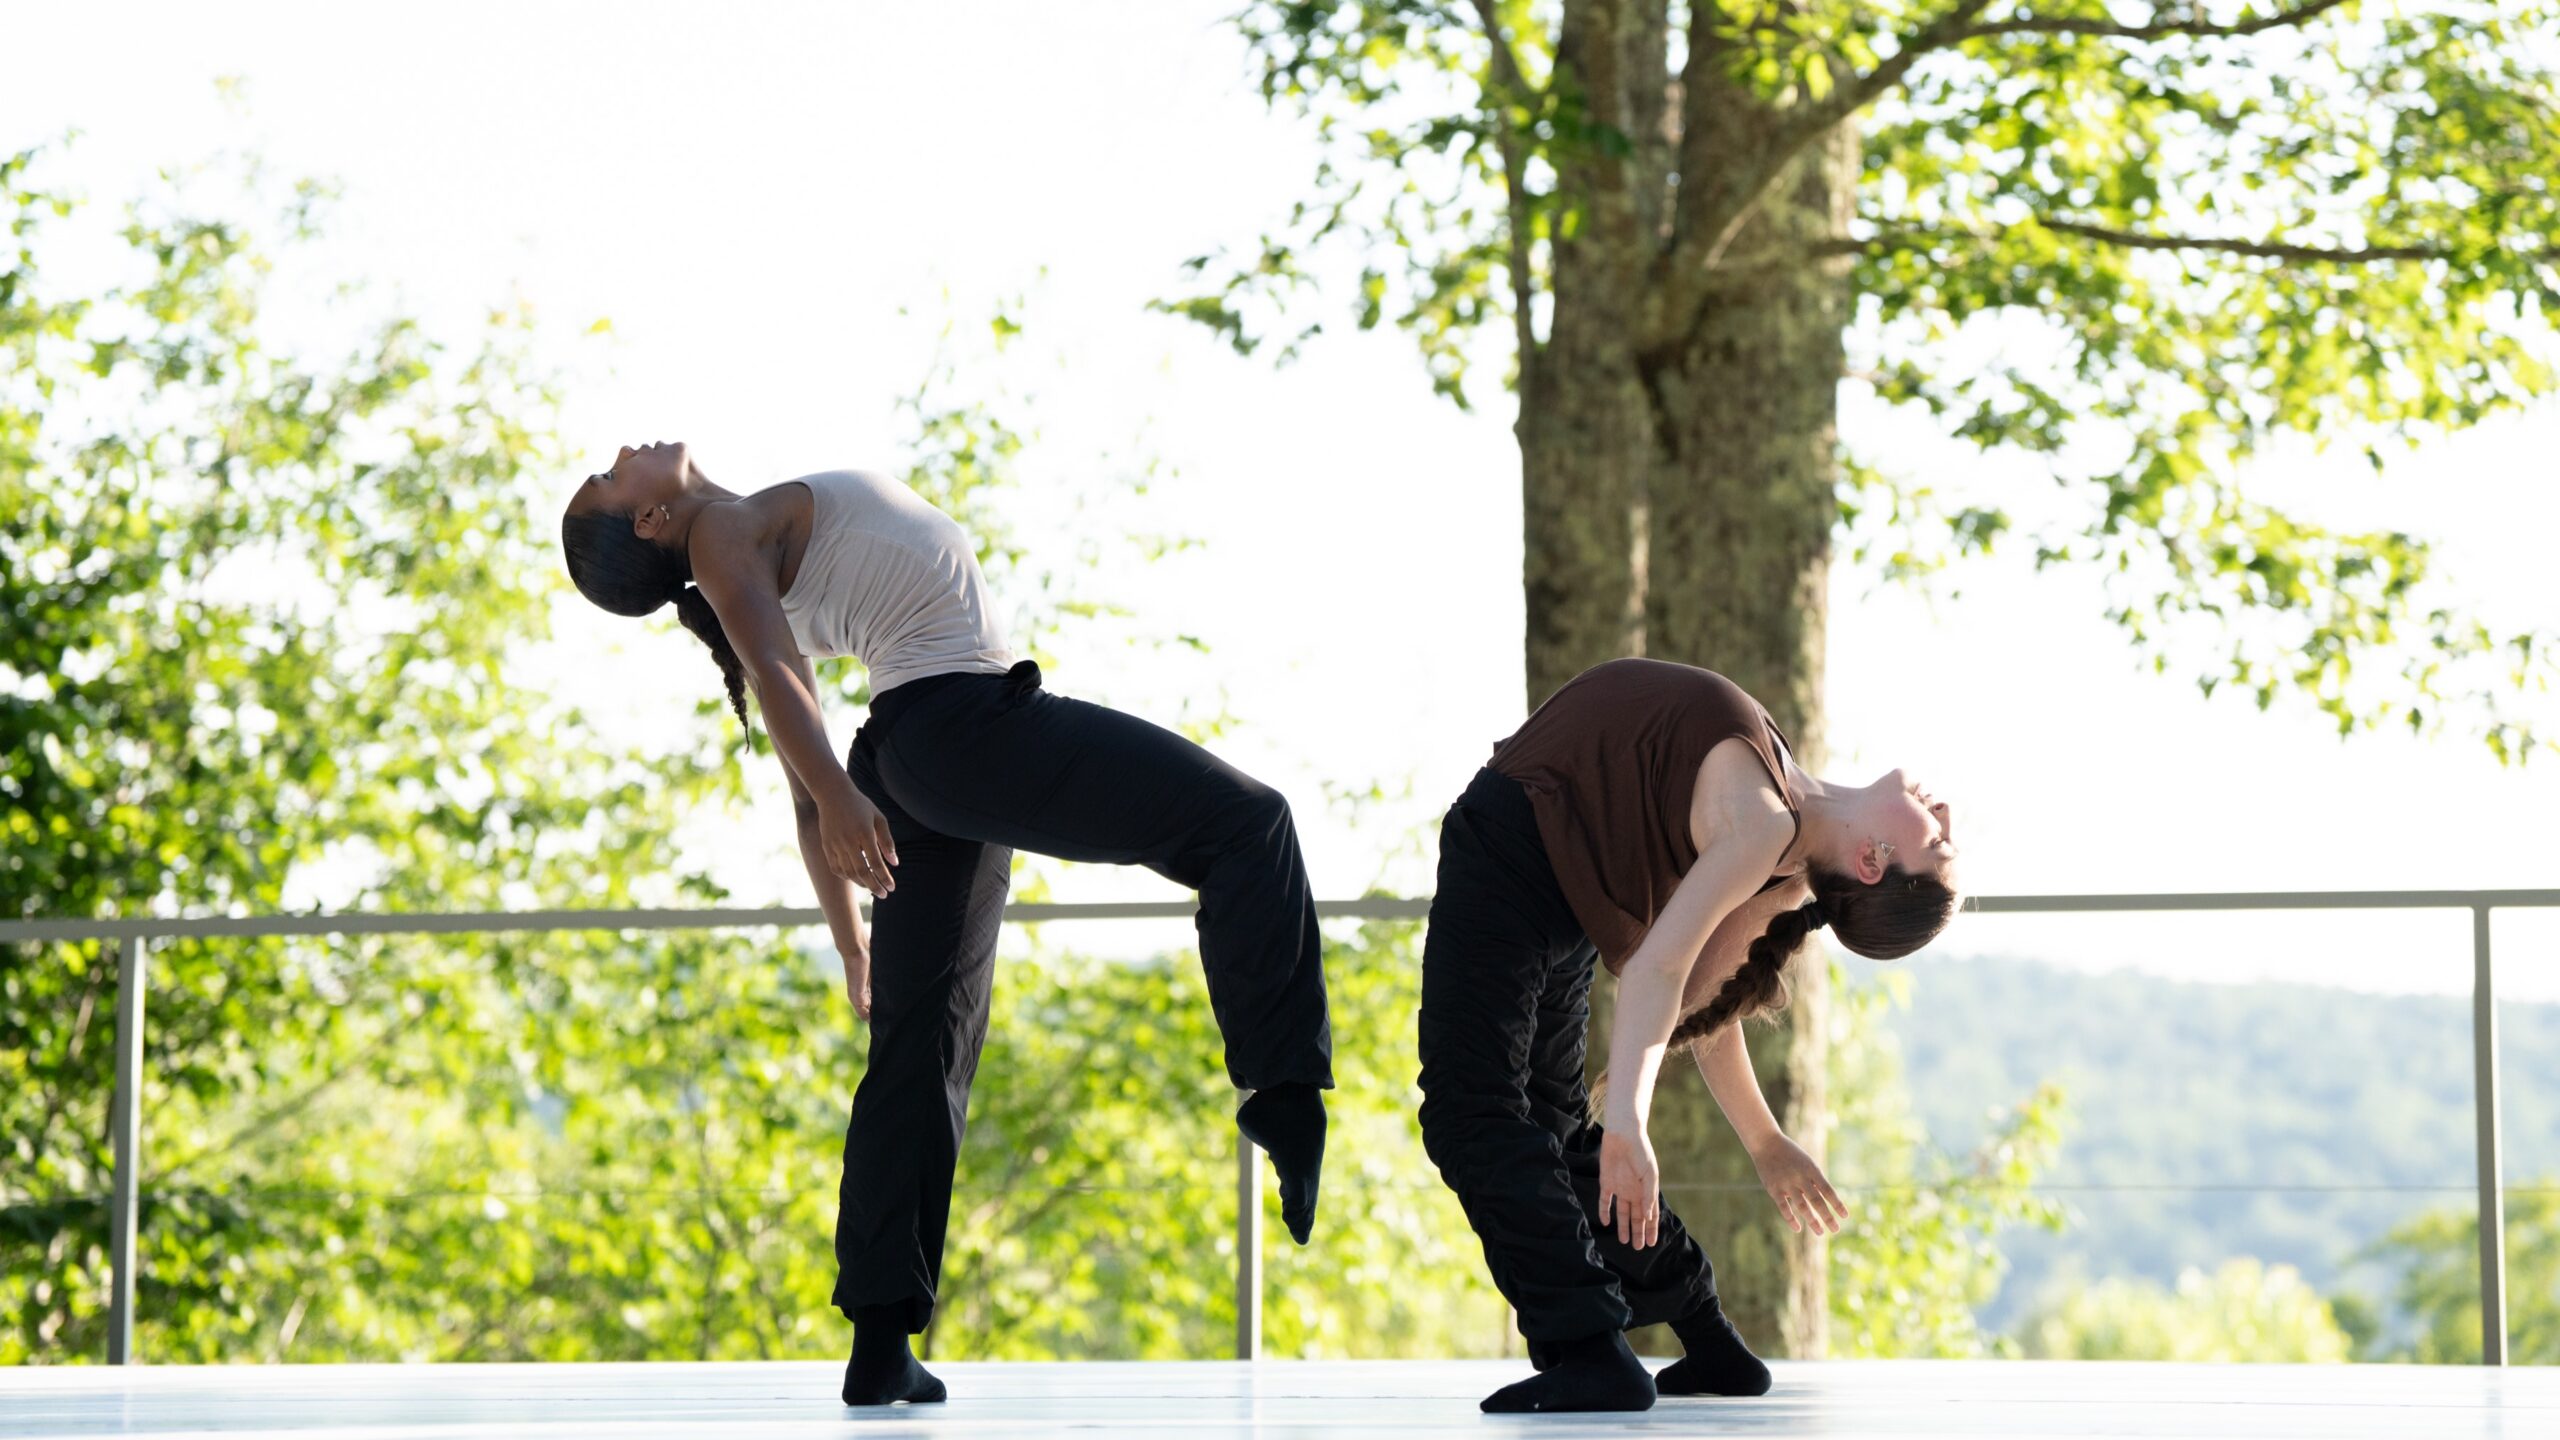 2 female dancers in their late teens or early twenties stand on an outdoor stage. They are wearing tank tops and black pants, and arching their backs to stare at the sky. The dancer on the left is raising her leg slightly off the ground.